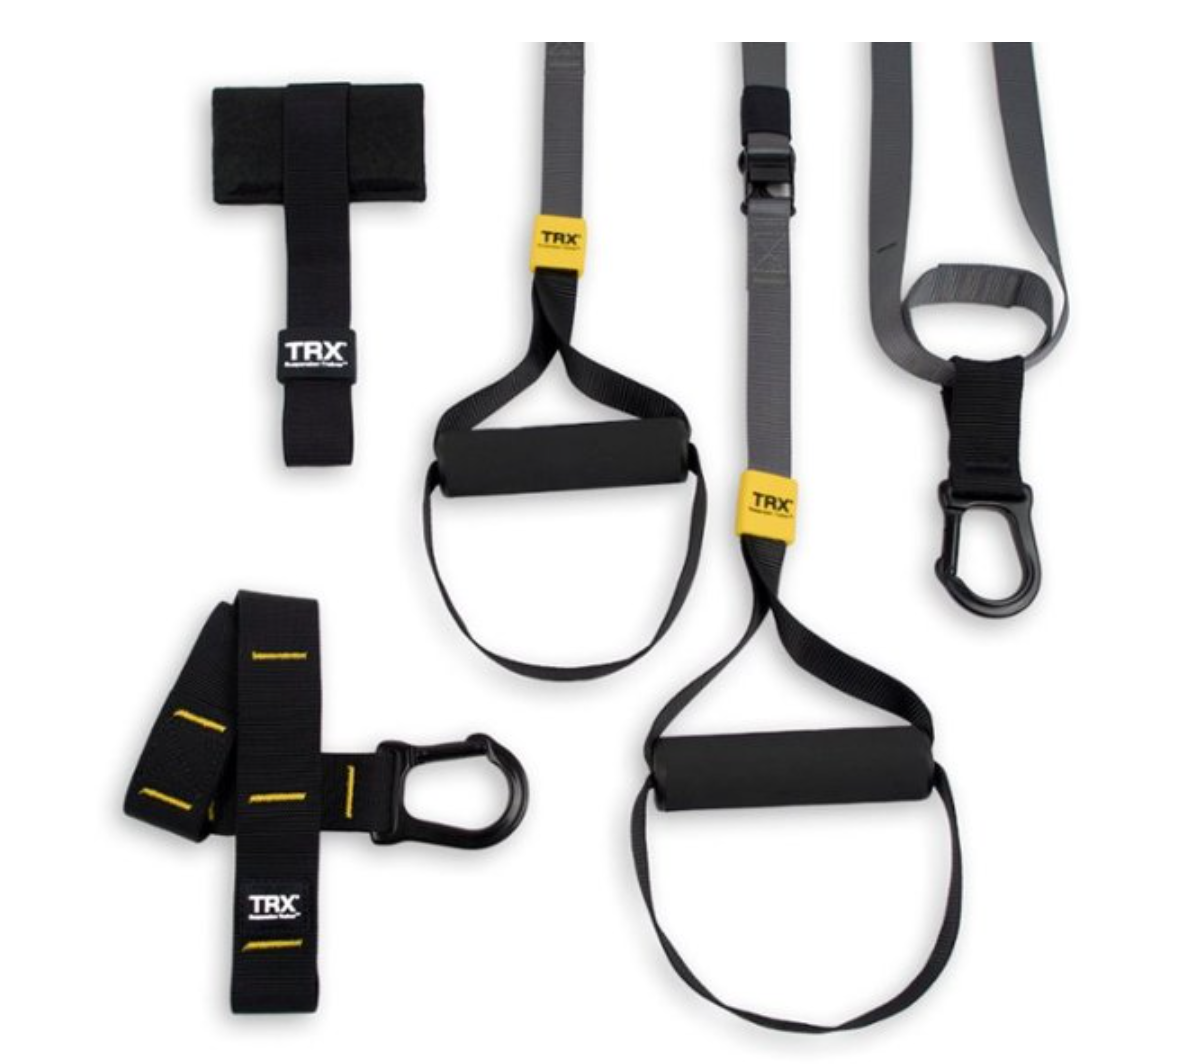 TRX - Fit System Suspension Trainer - Black/Gray/Yellow